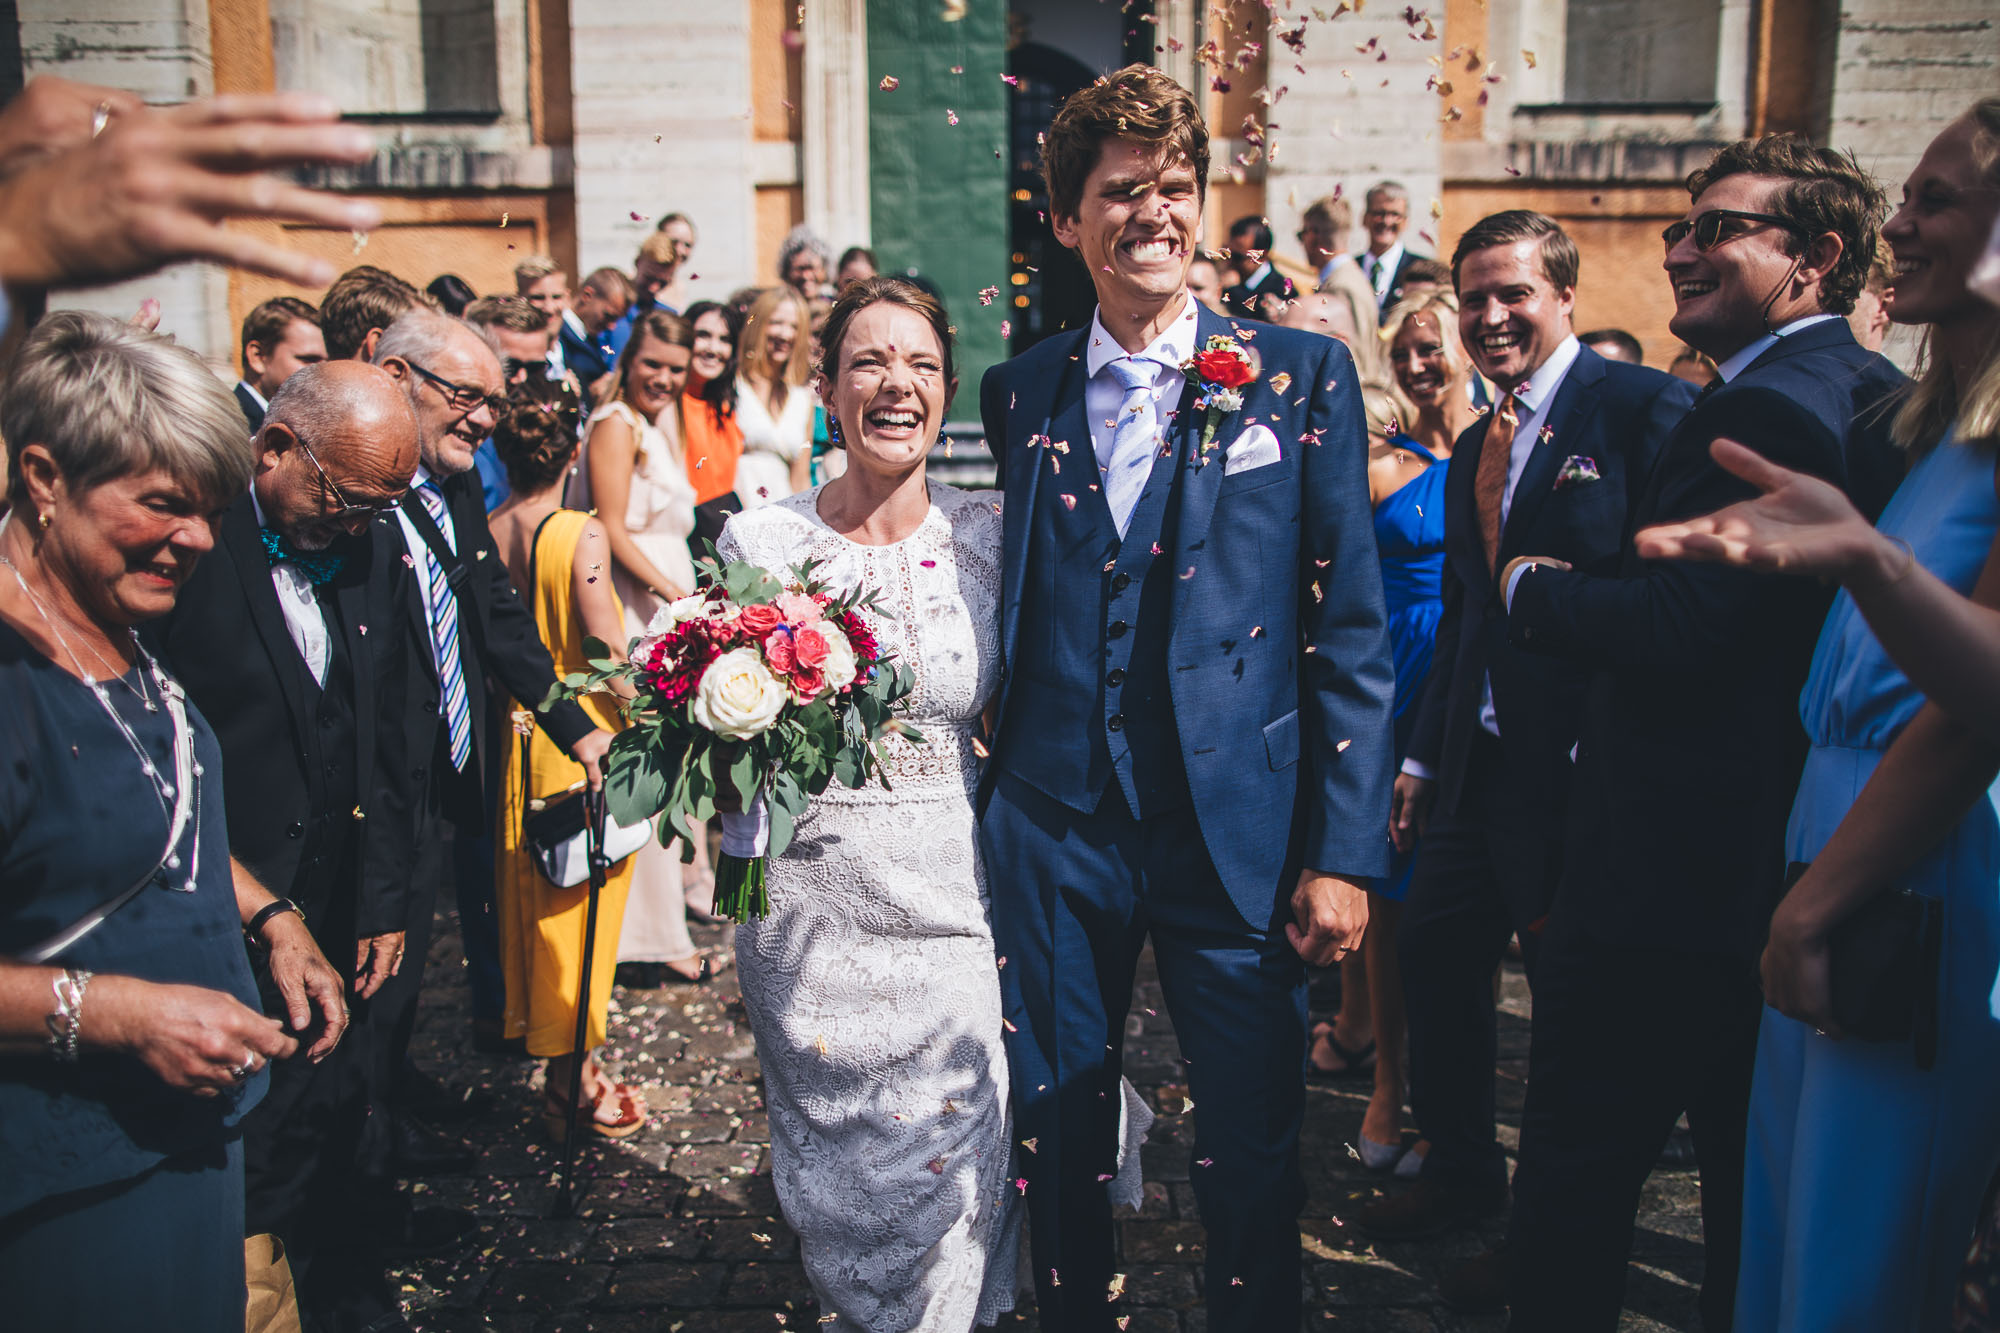 couple gets confetti thrown on them